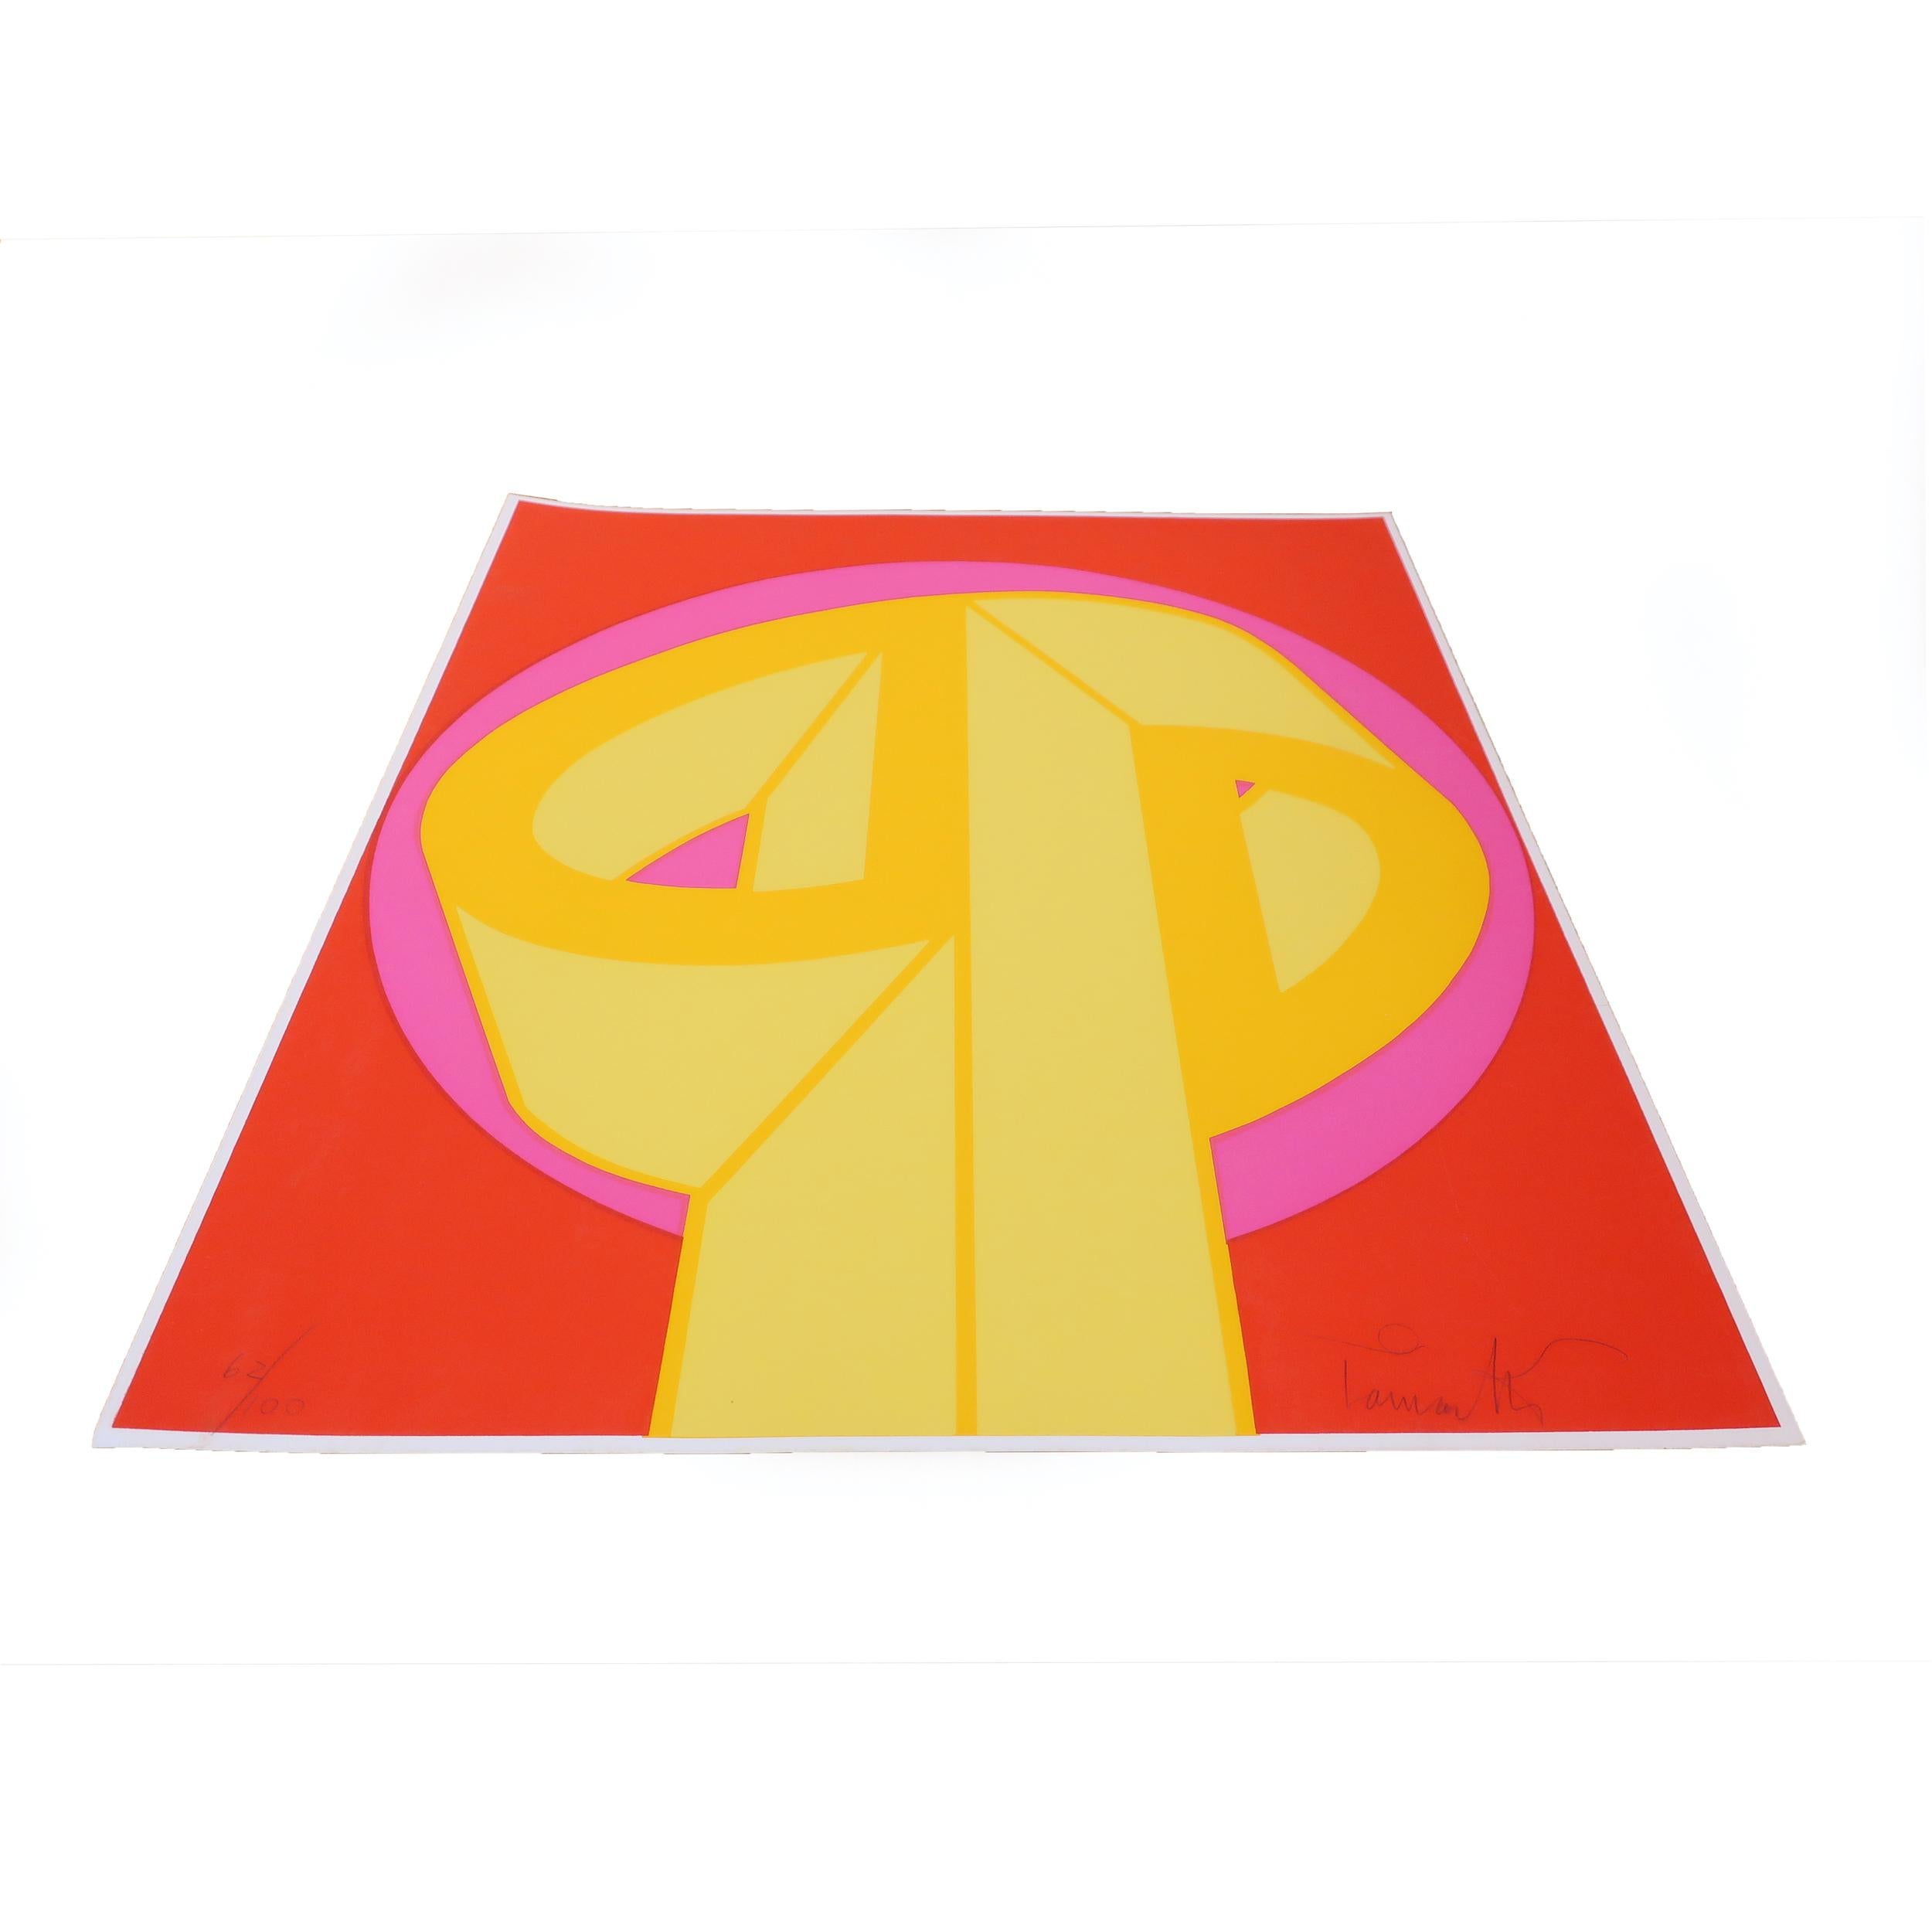 A stunning and bright abstract geometric serigraph in the hard edge style by American painter, print maker, and set designer Paul Camacho (1929-1989). Yellow, orange, and pink against a red background makes this print pop! Hand-signed and numbered